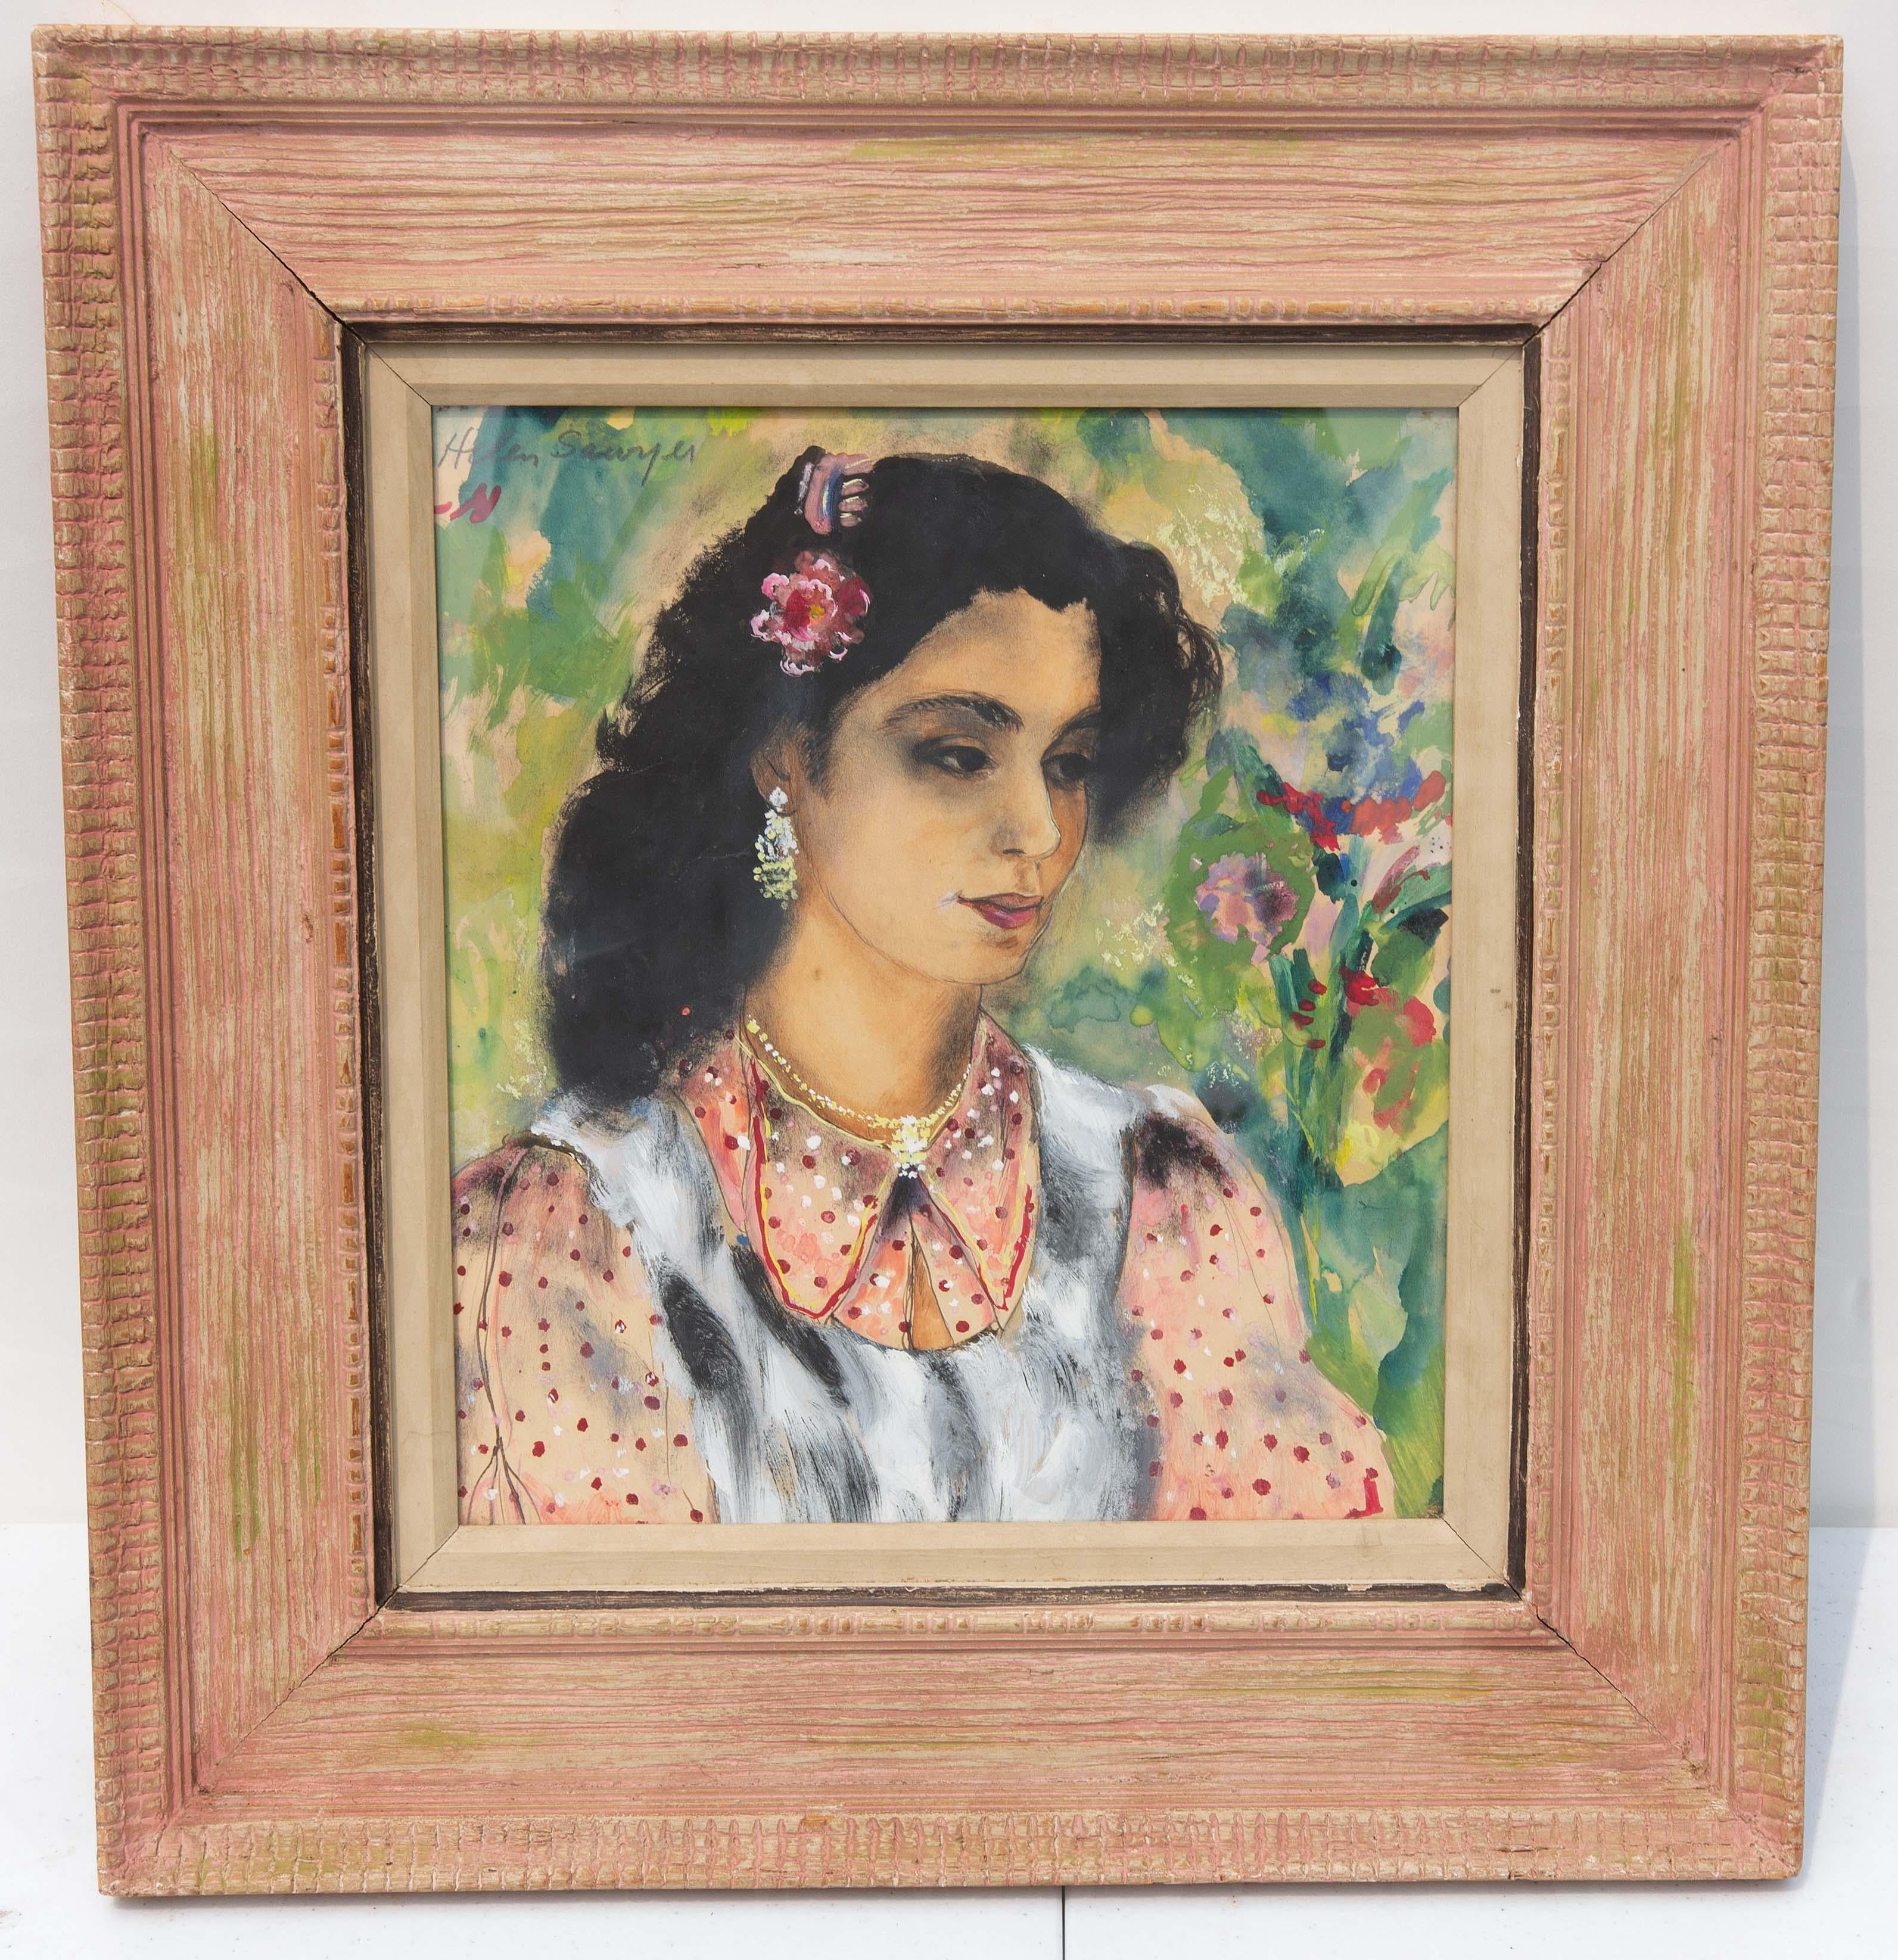 Pair of midcentury portrait paintings by Helen Sawyer (1900-1999). Both are signed, circa 1940. In excellent quality Mid-Century Modern style frames. 

Landscape and still-life painter Helen Alton Sawyer was the daughter of a prominent Washington,